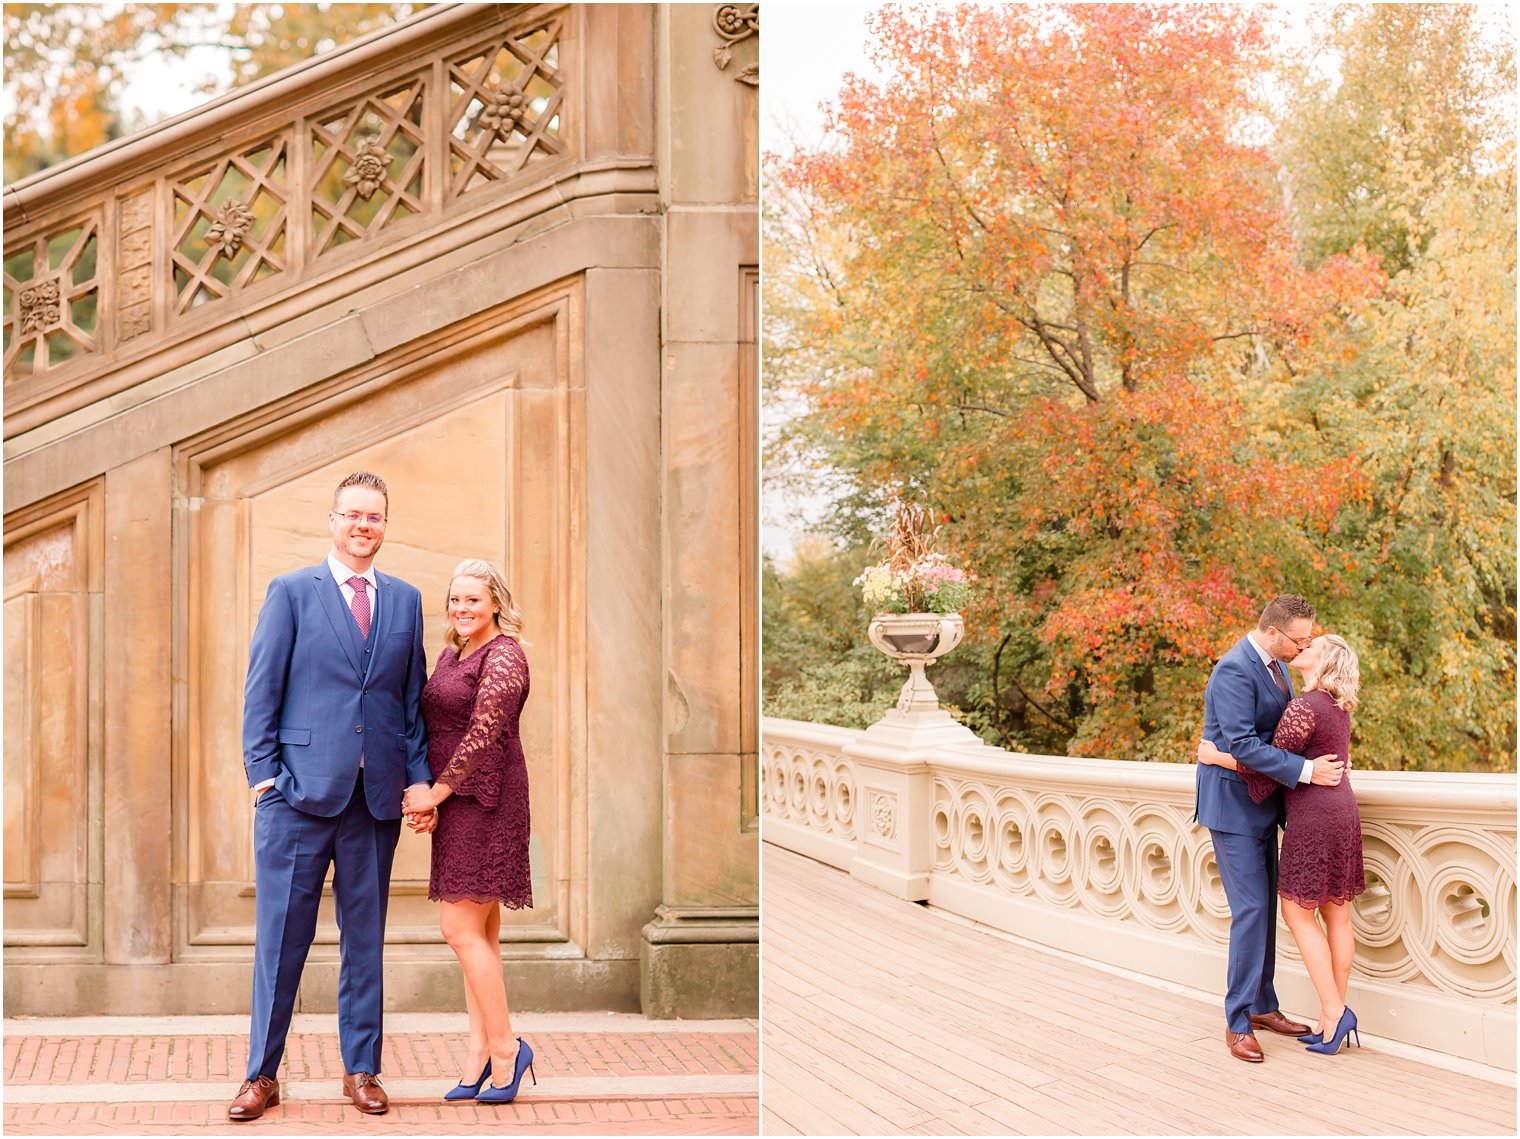 Classic engagement photos in Central Park